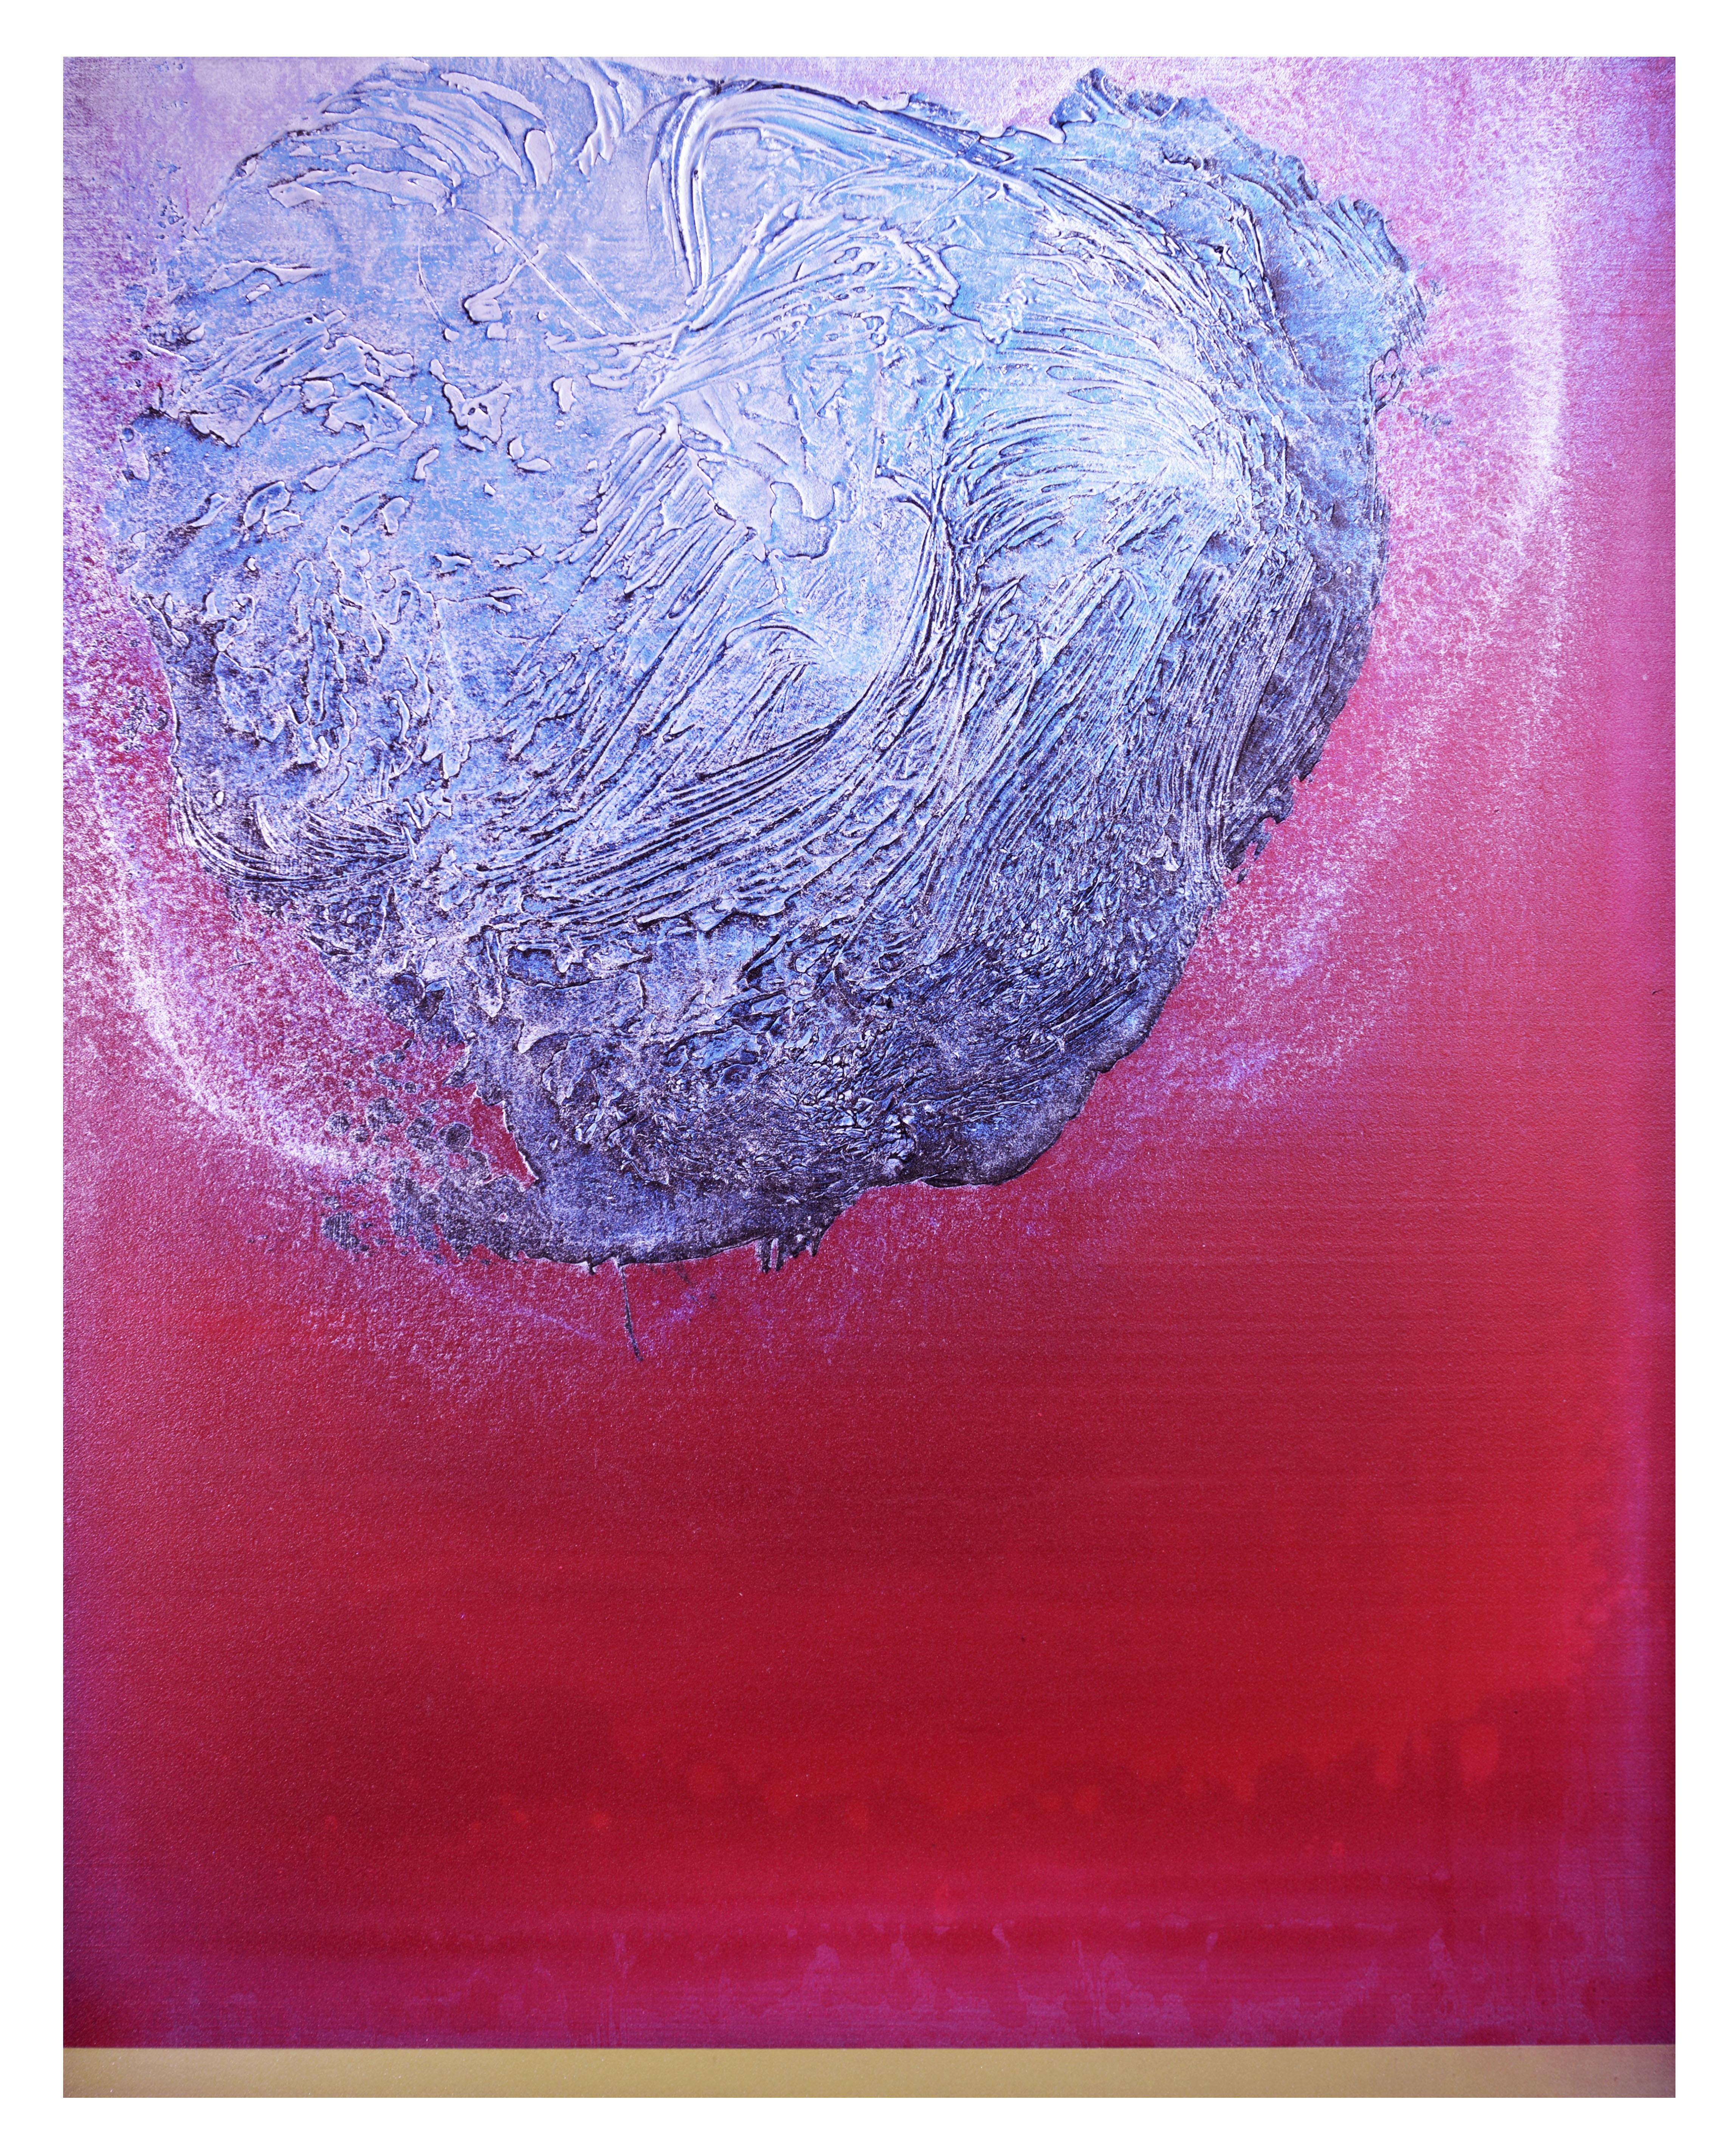 Solidarity - Four panels in red/fuscia/silver 4